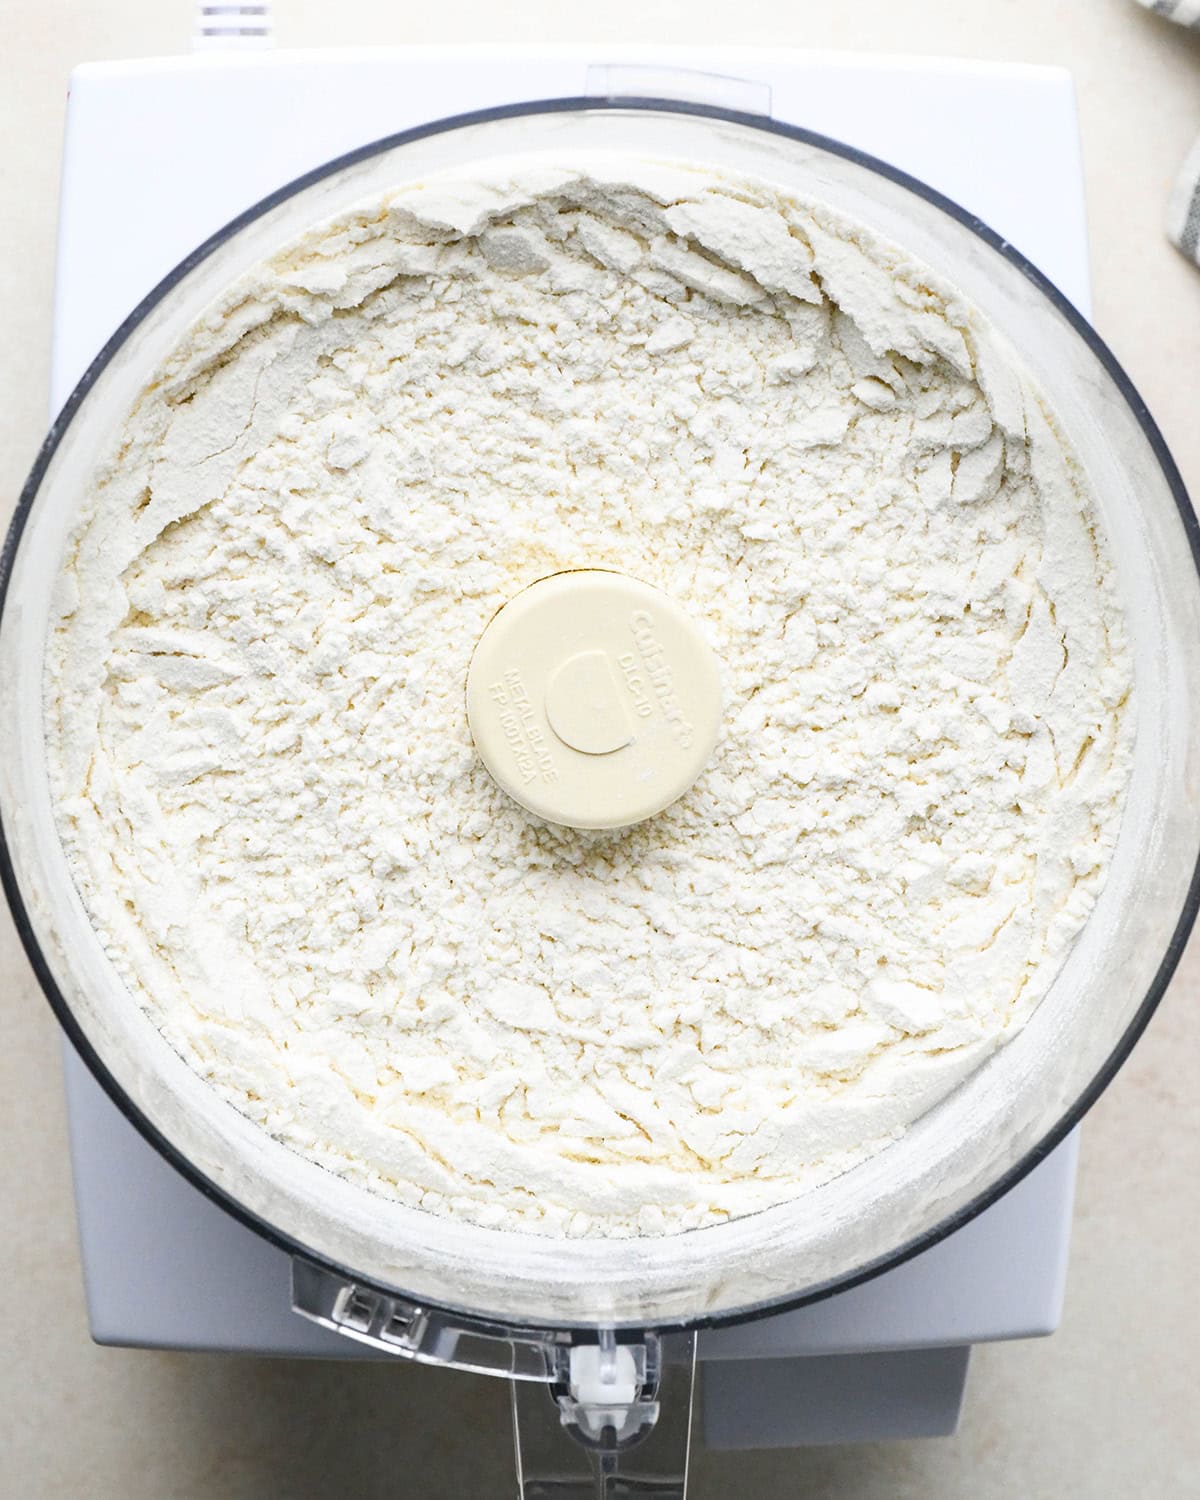 How to Make Quiche crust - dry ingredients in a food processor after mixing